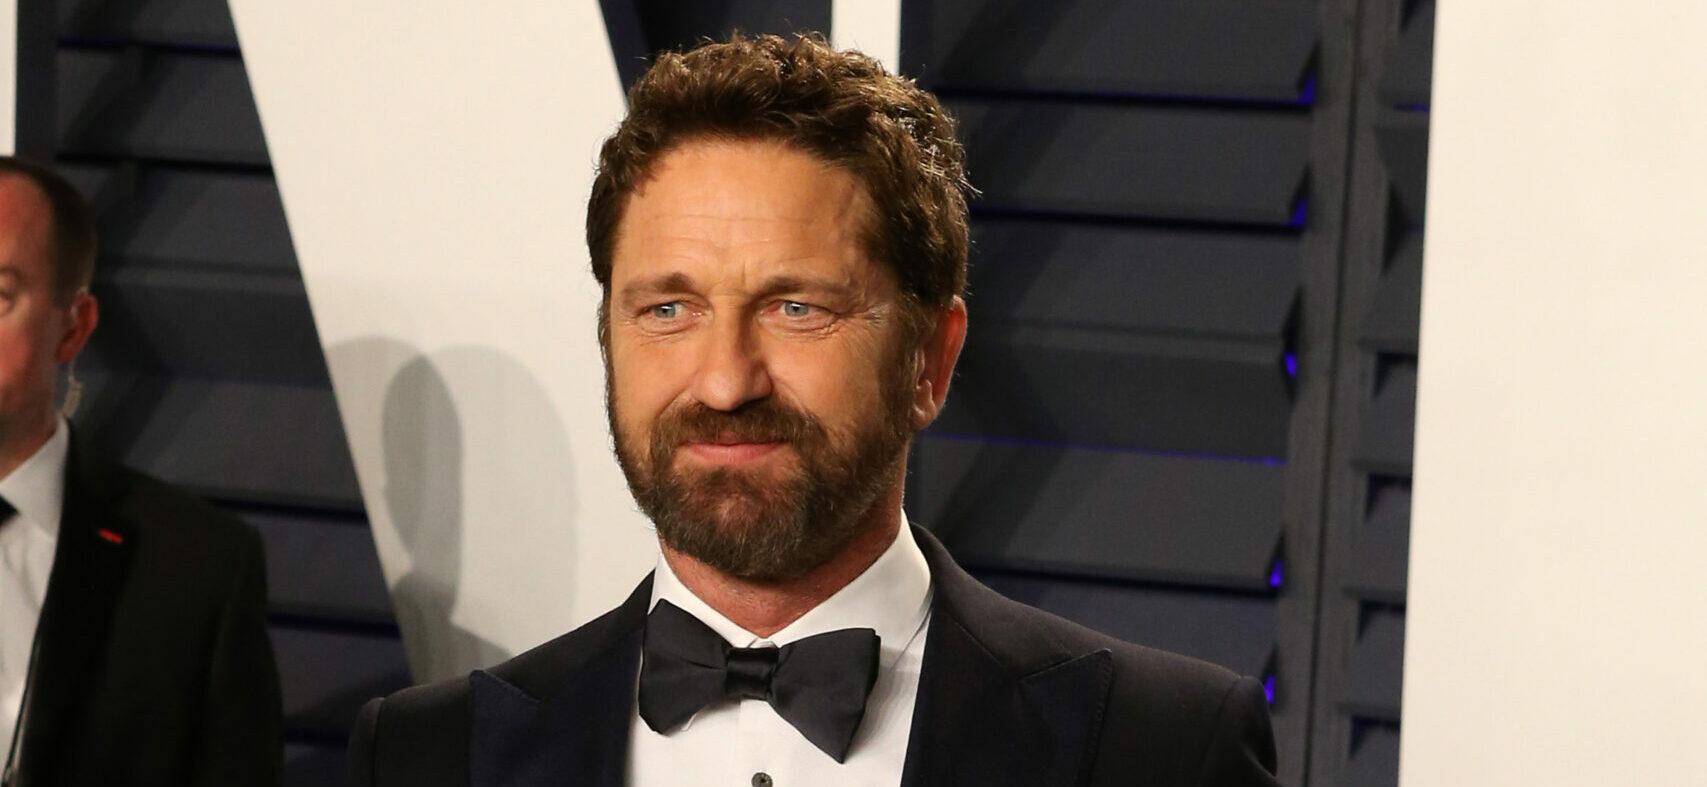 Gerard Butler Recalls Unknowingly Rubbing Phosphoric Acid All Over His Face On The Set Of His New Movie 'Plane'